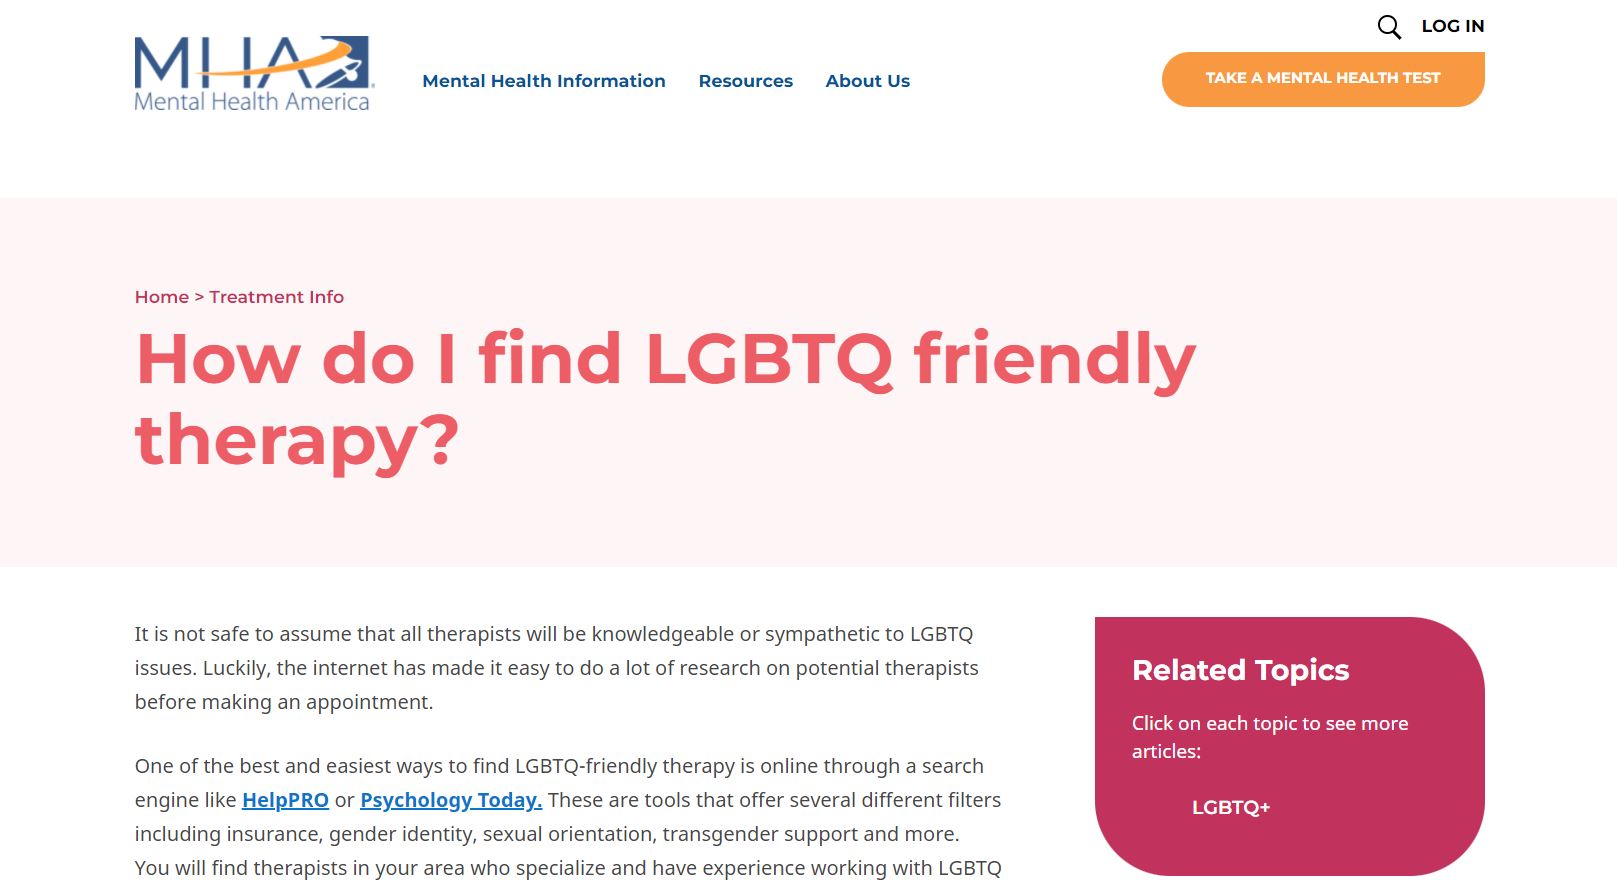 Mental Health America: How do I find LGBTQ friendly therapy?